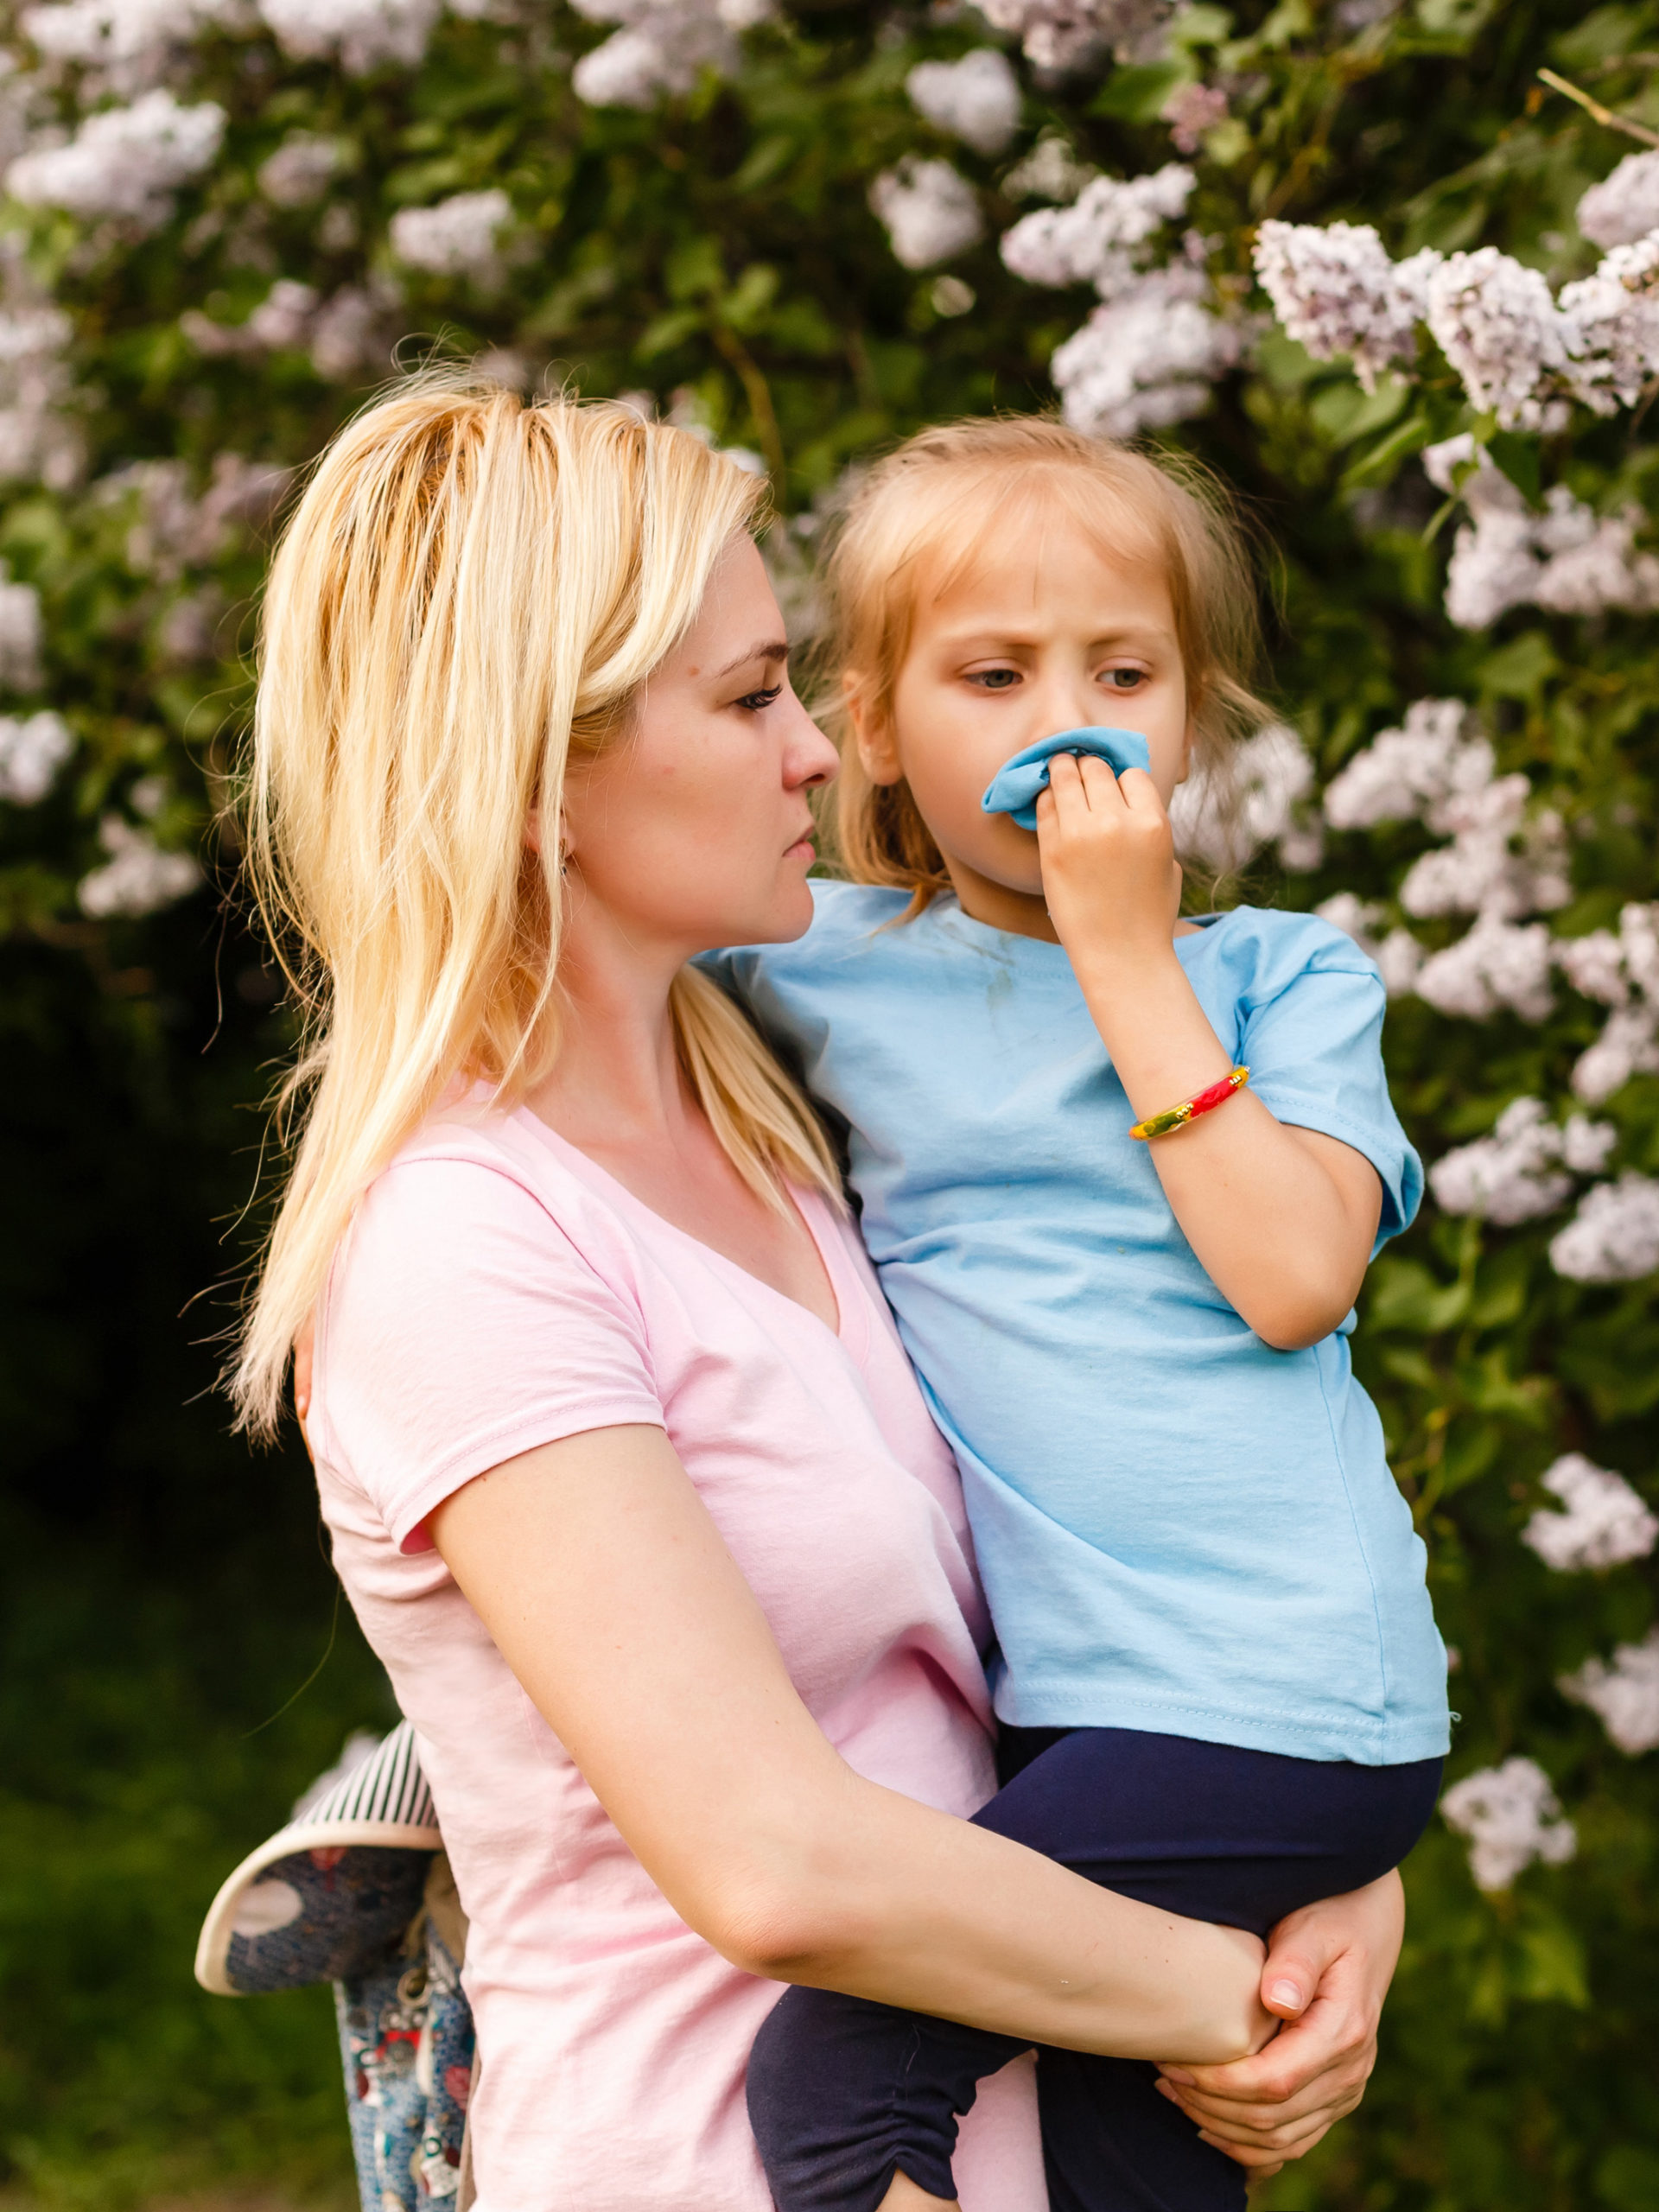 mom holding little girl with allergies blowing her nose surrounded by flowers